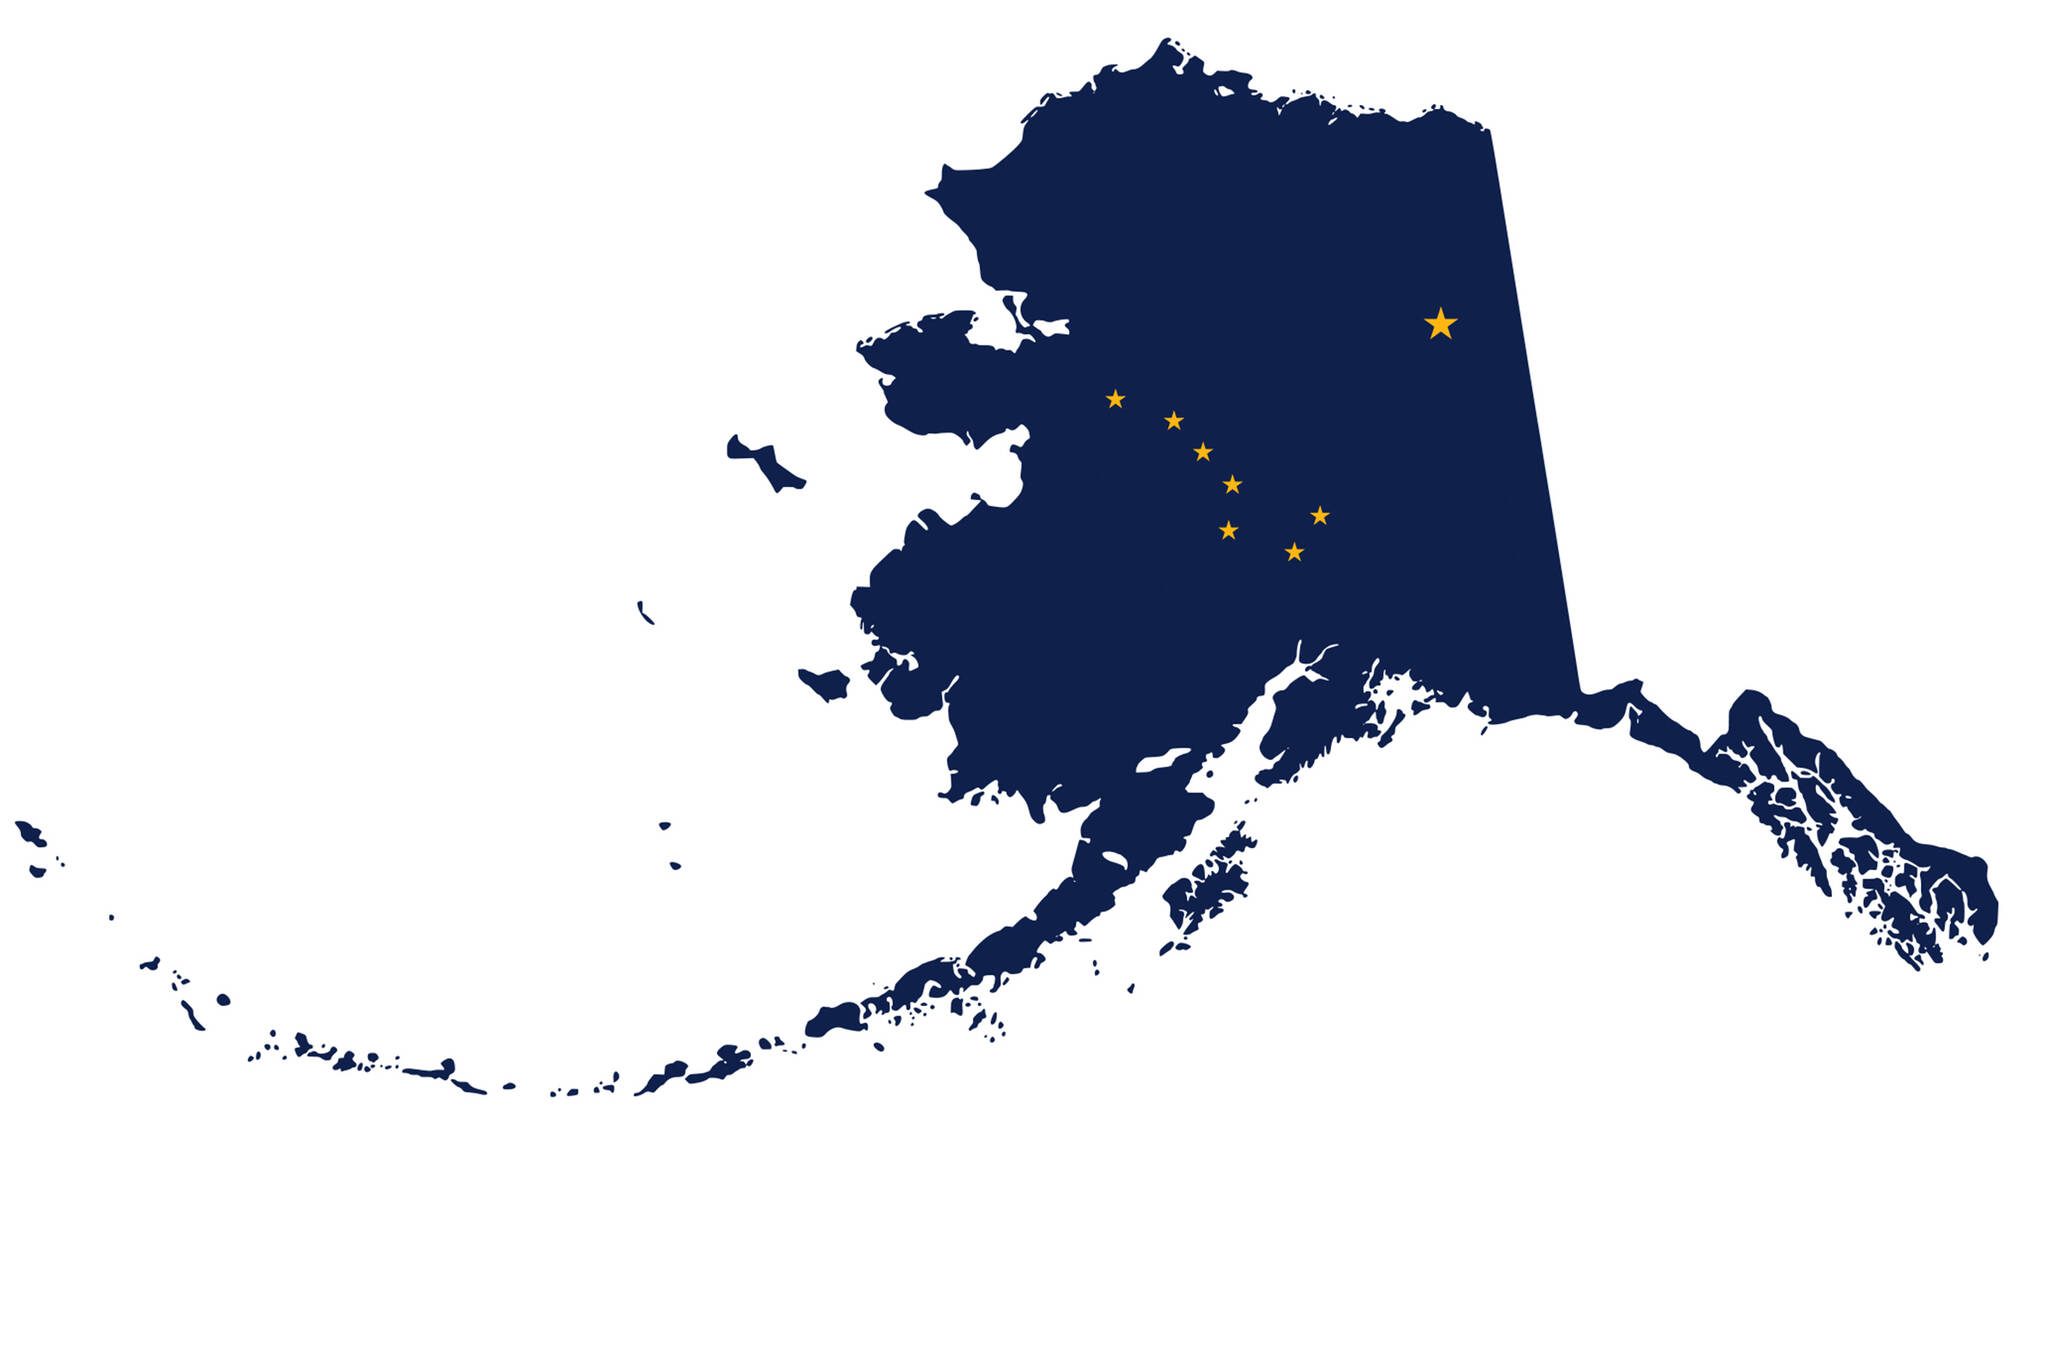 This image available under the Creative Commons license shows the outline of the state of Alaska filled with the pattern of the state flag. The state on Thursday reported a modest population growth between April 2020 and July 2021. It's the first time since 2016 the state has reported a population increase. (